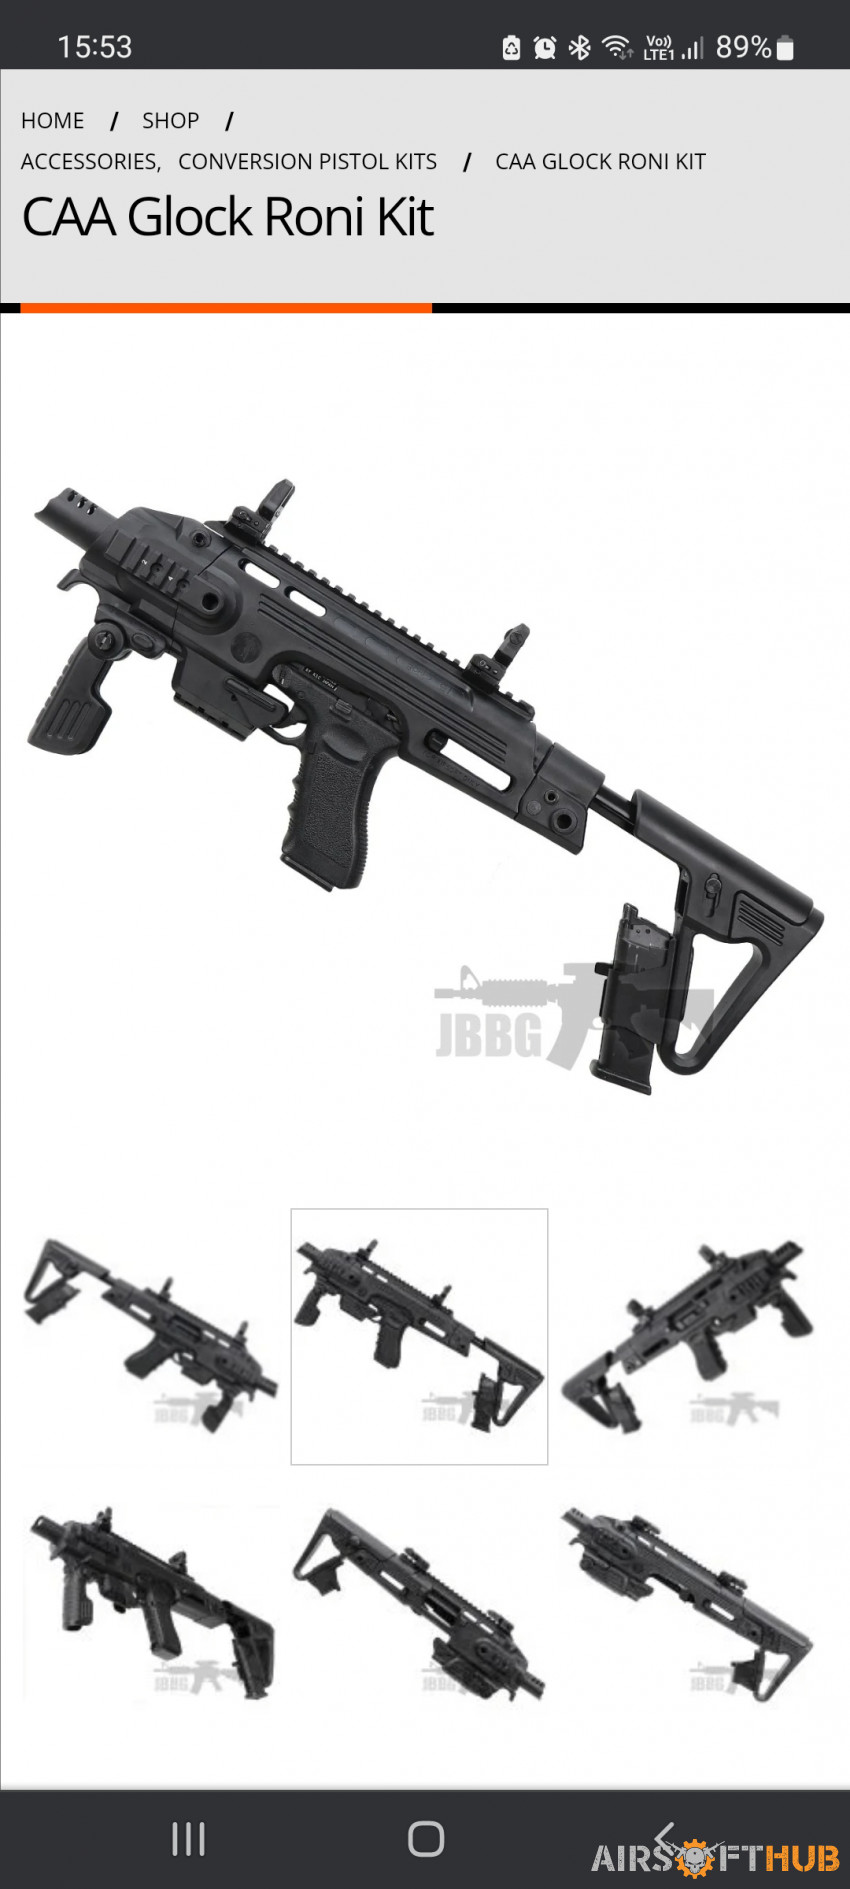 Roni carbine kit g17/18 - Used airsoft equipment